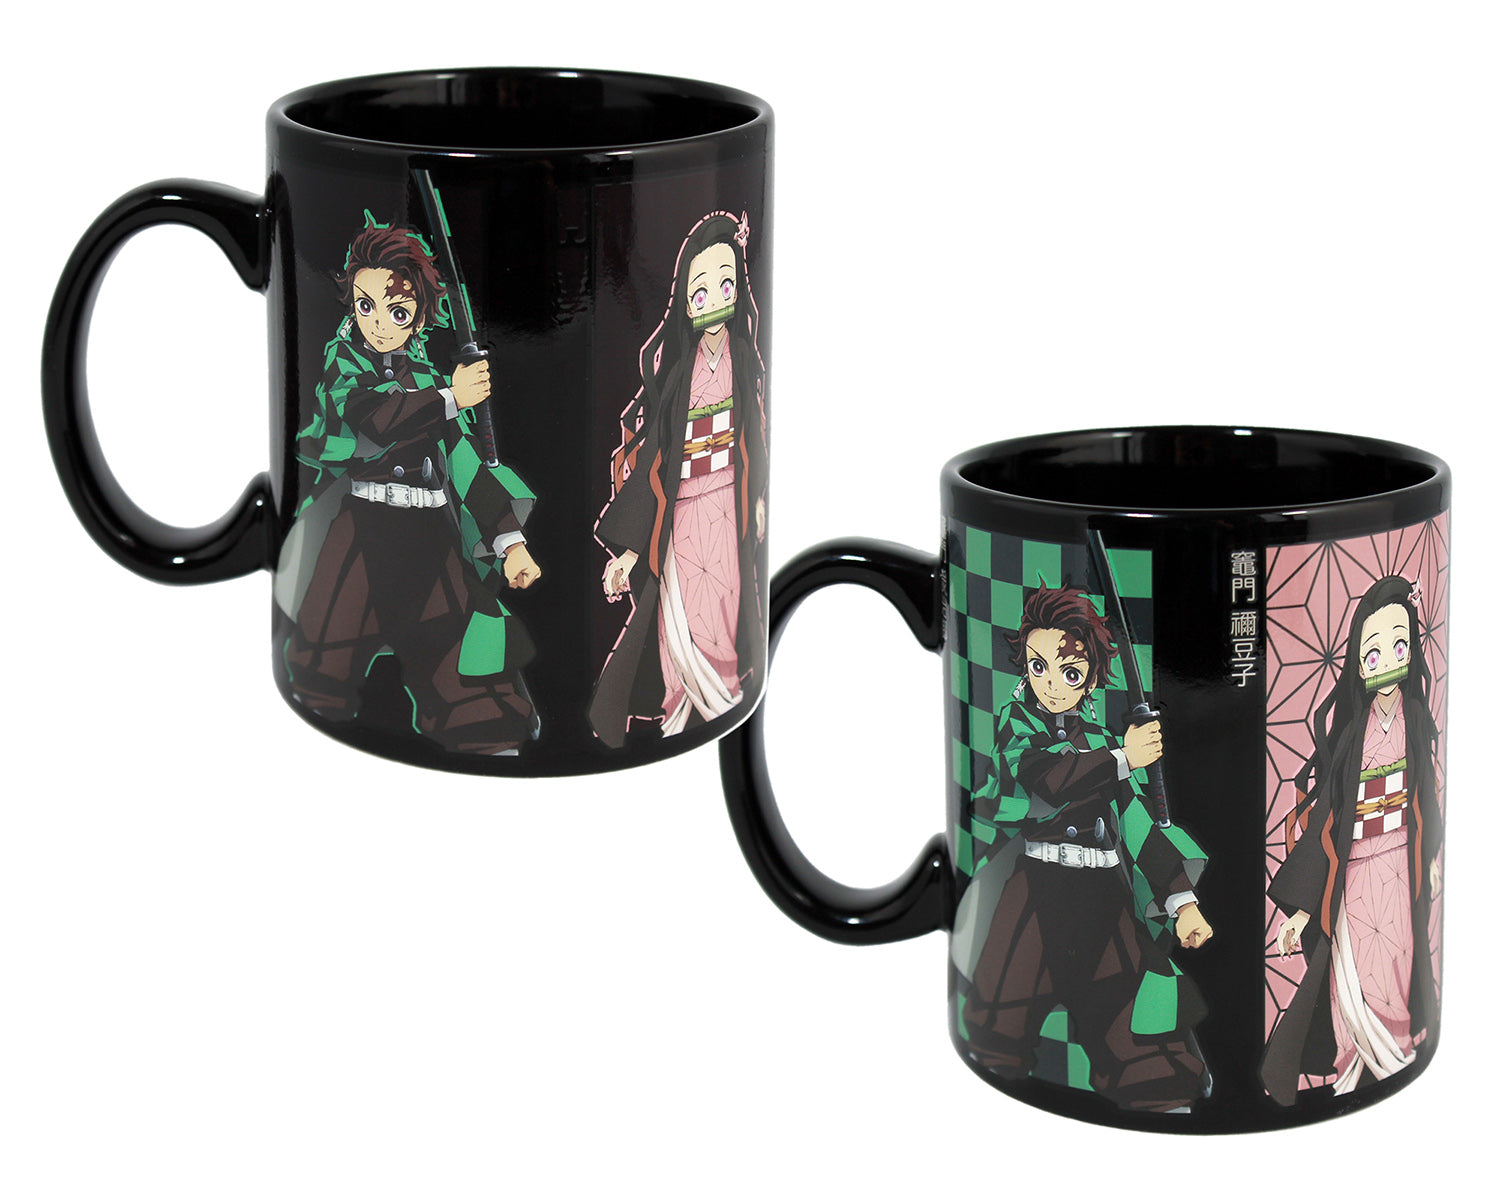 Buy BeneU Color Changing Coffee Mug Heat-Sensitive Reactive Ceramic Cup  Magic Funny Anime Mugs Christmas Gifts Online at Low Prices in India -  Amazon.in